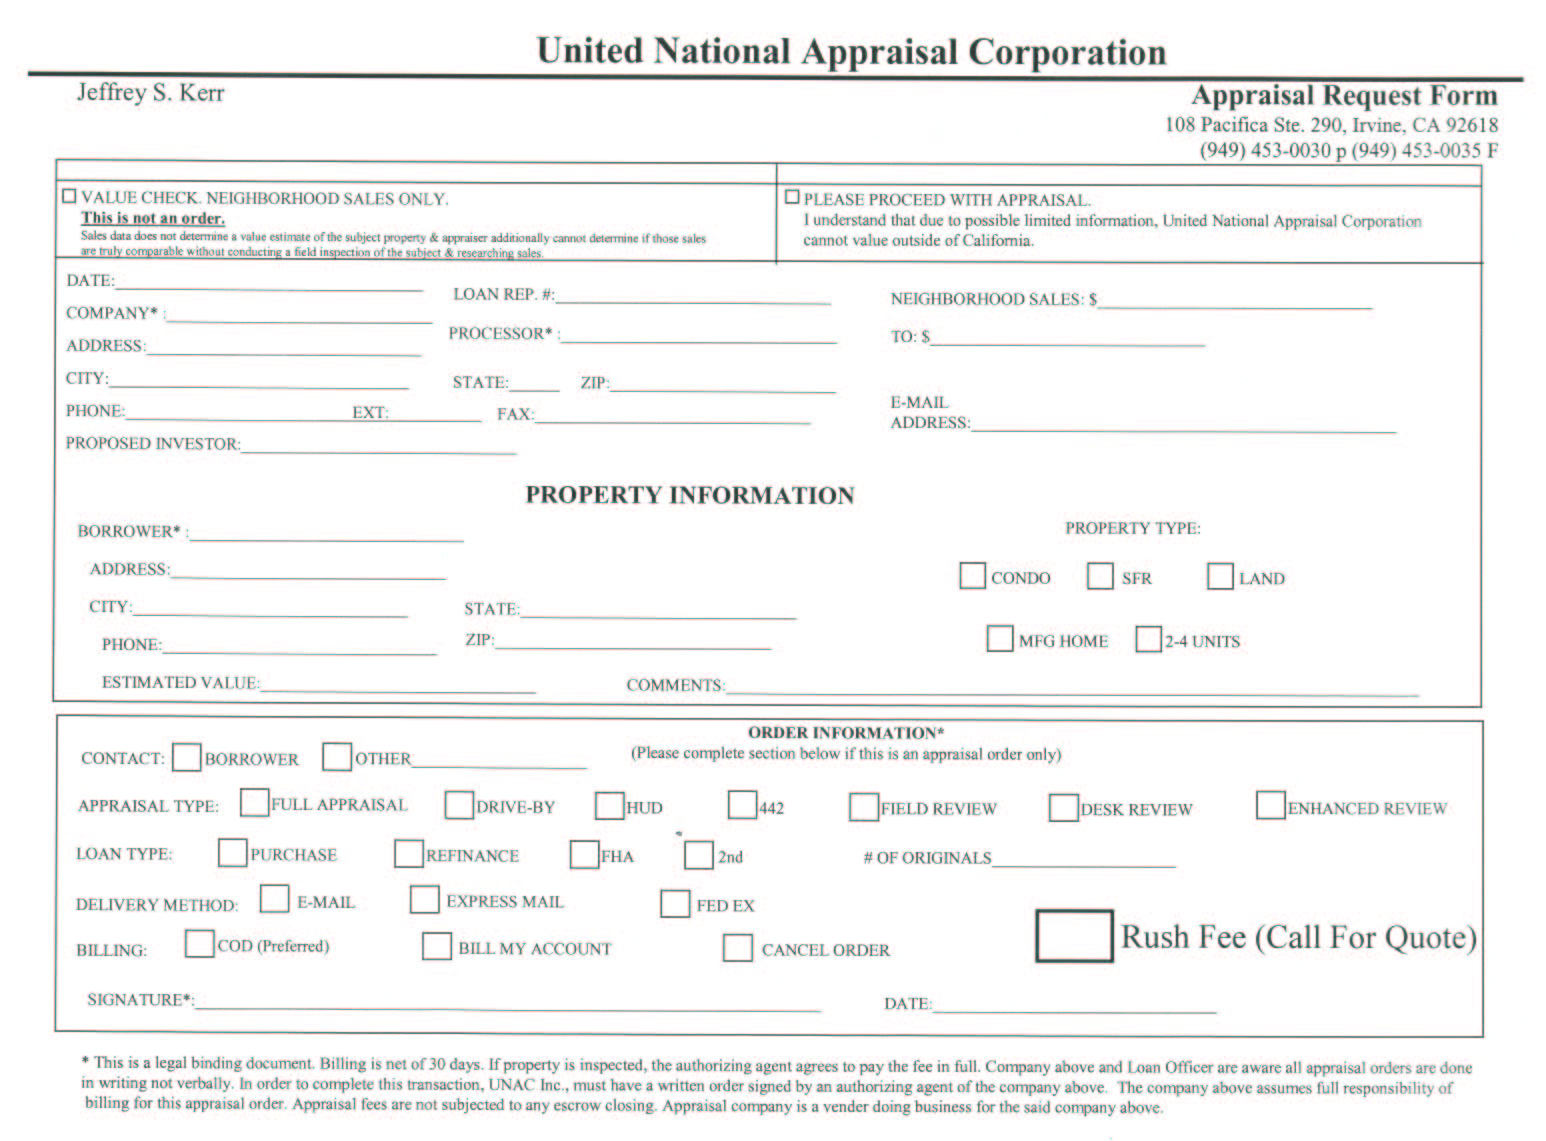 Real estate appraisal services offered by United National 